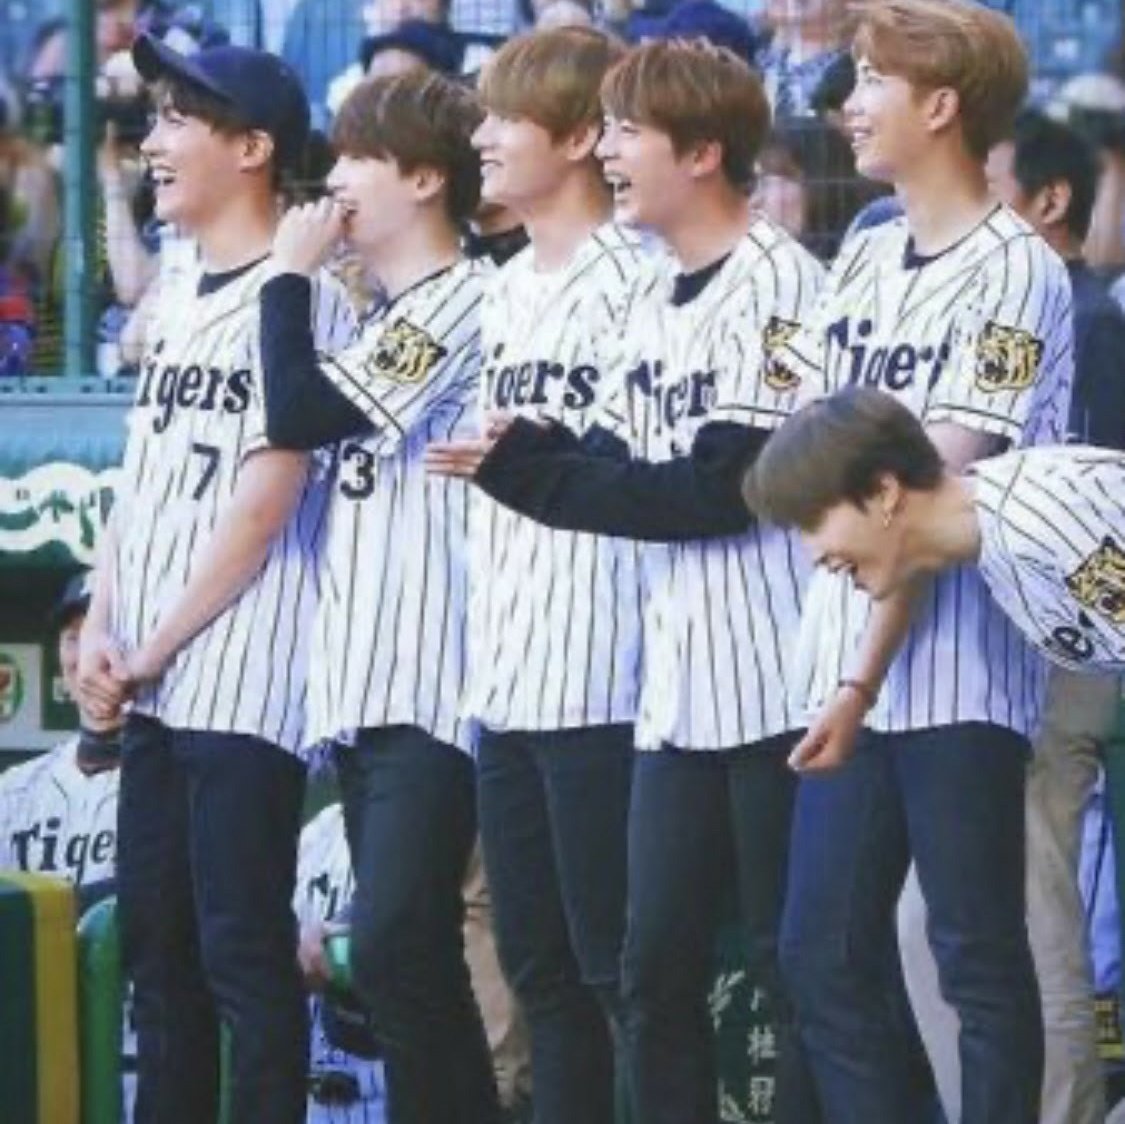 Jungkook threw the first pitch in a Japanese baseball game. Tae looked so proud of him. 